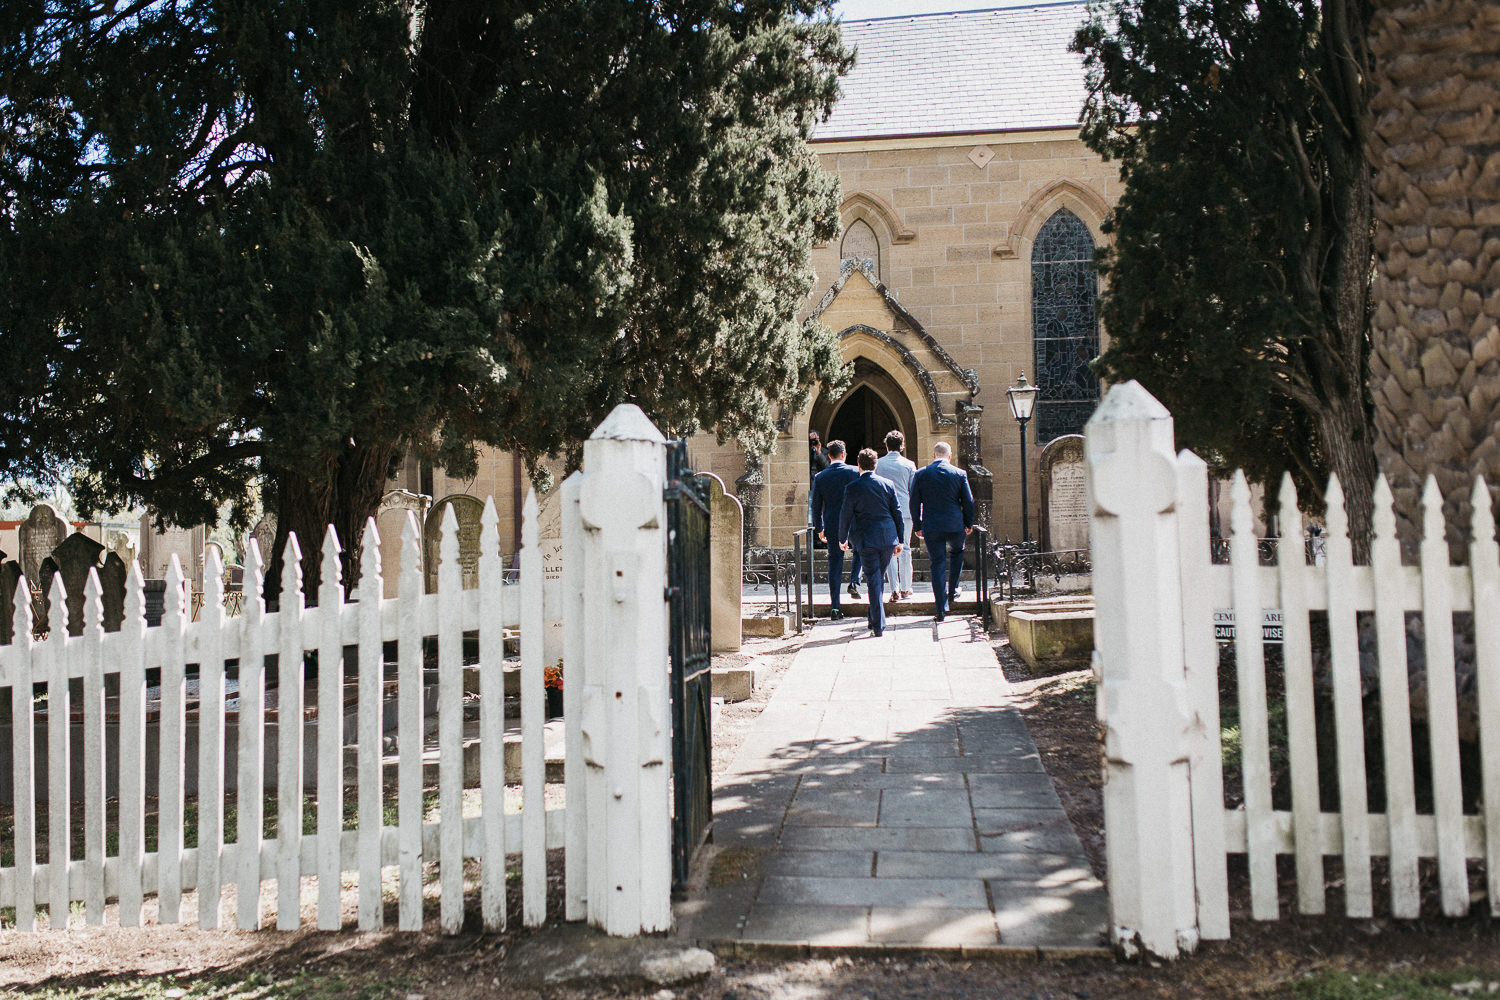 briars-country-lodge-wedding-bowral-nsw-miriam-andy-32